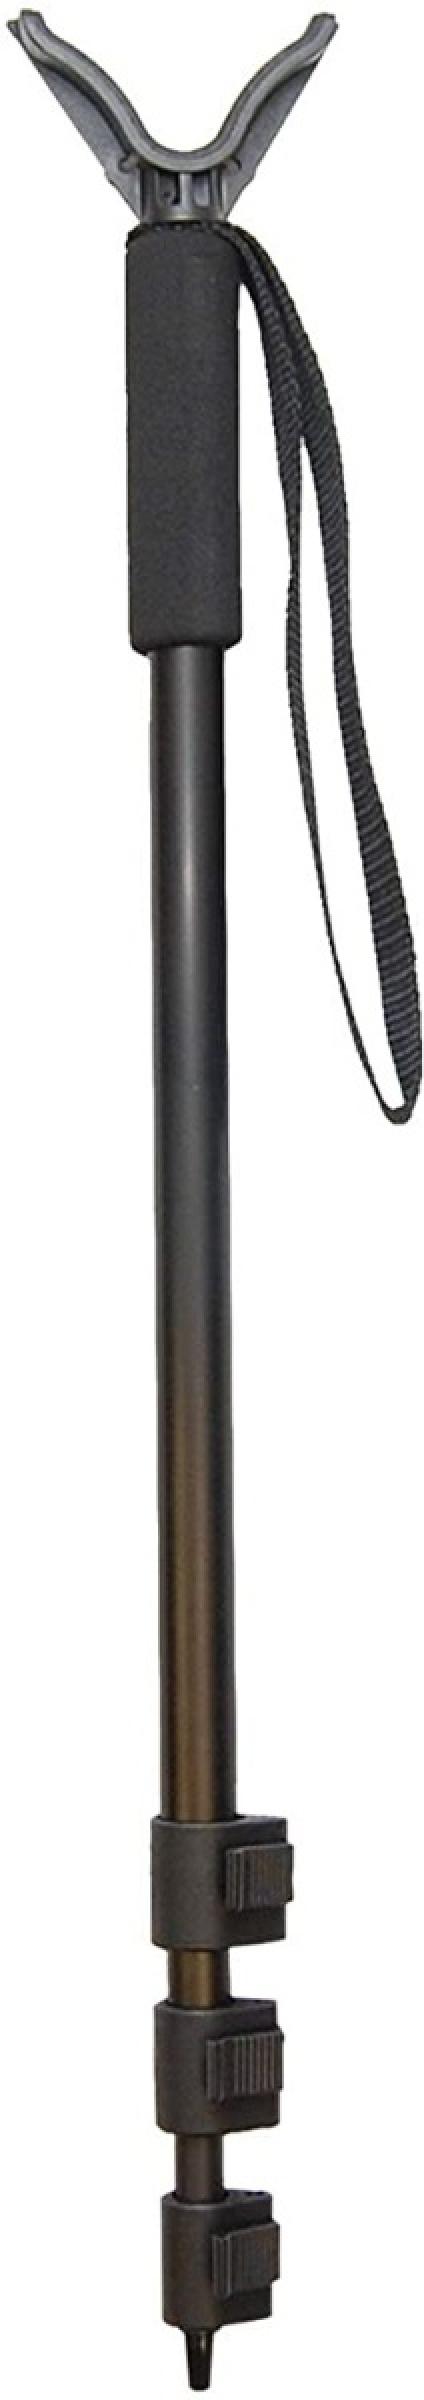 content/products/Allen Monopod Shooting Stick